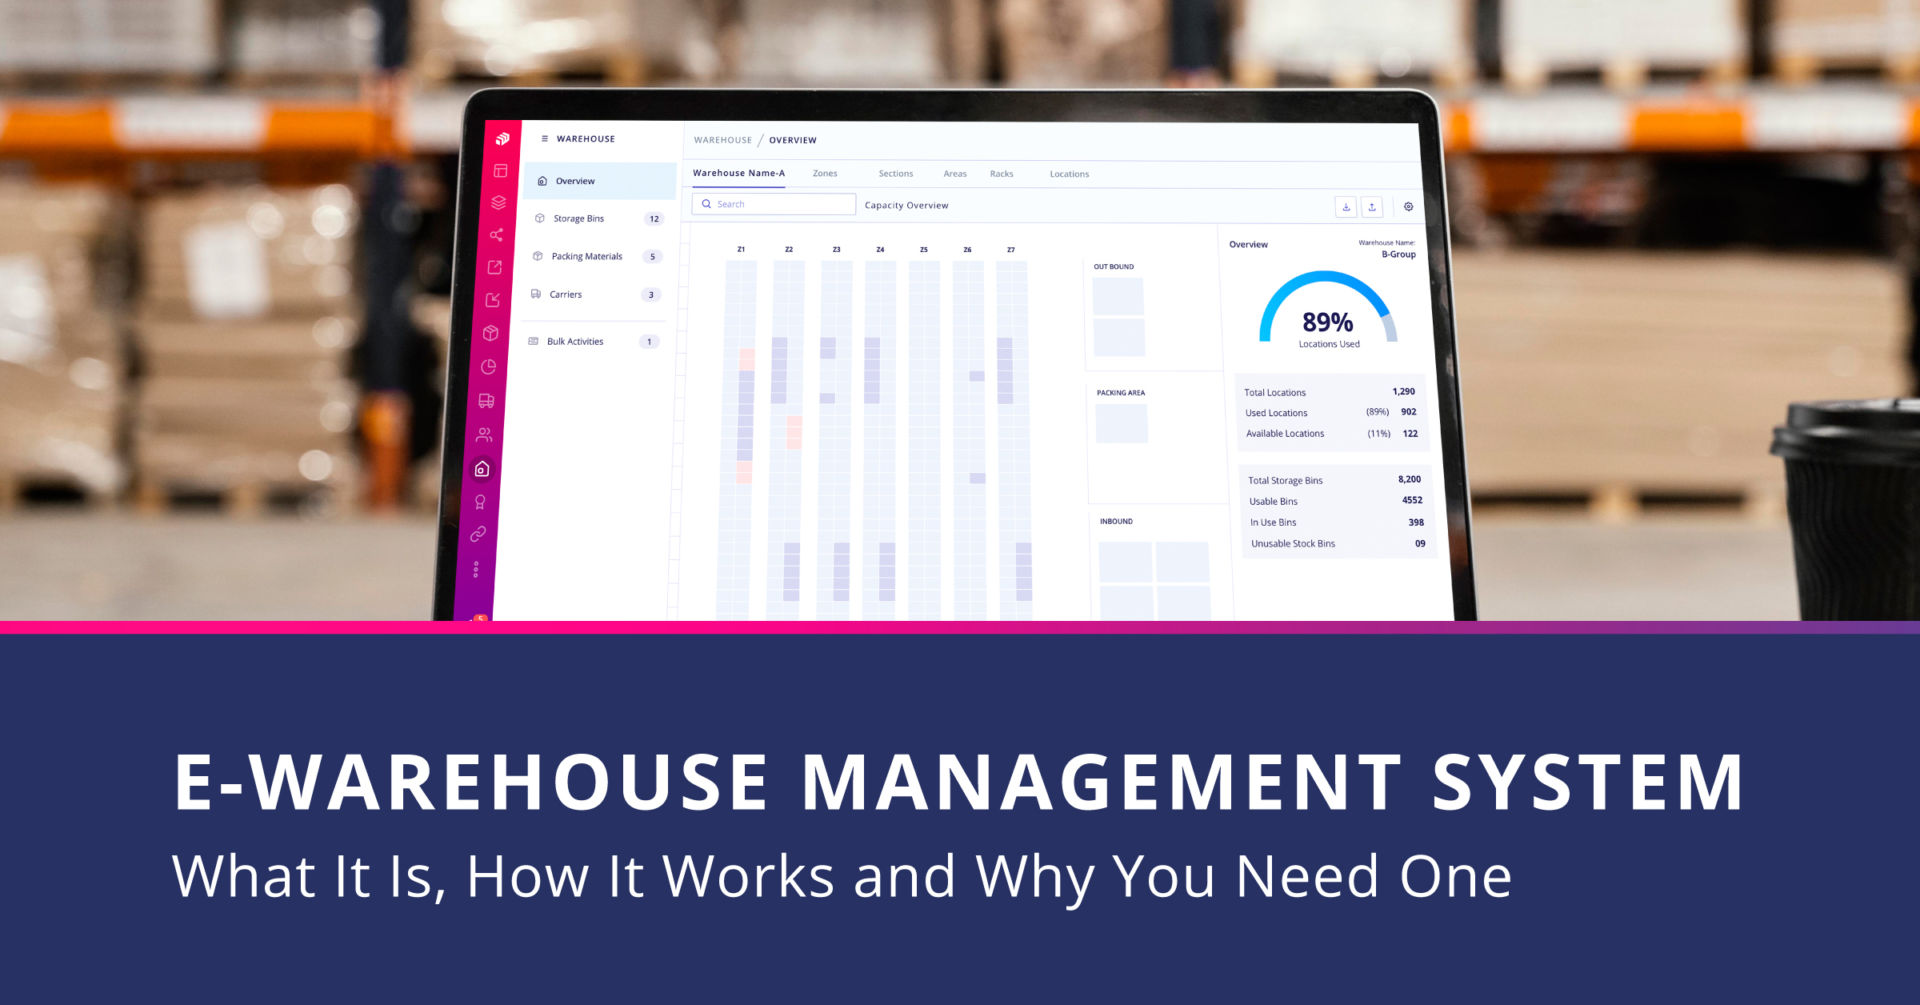 e-Warehouse Management System Explained: What It Is, How It Works and Why You Need One